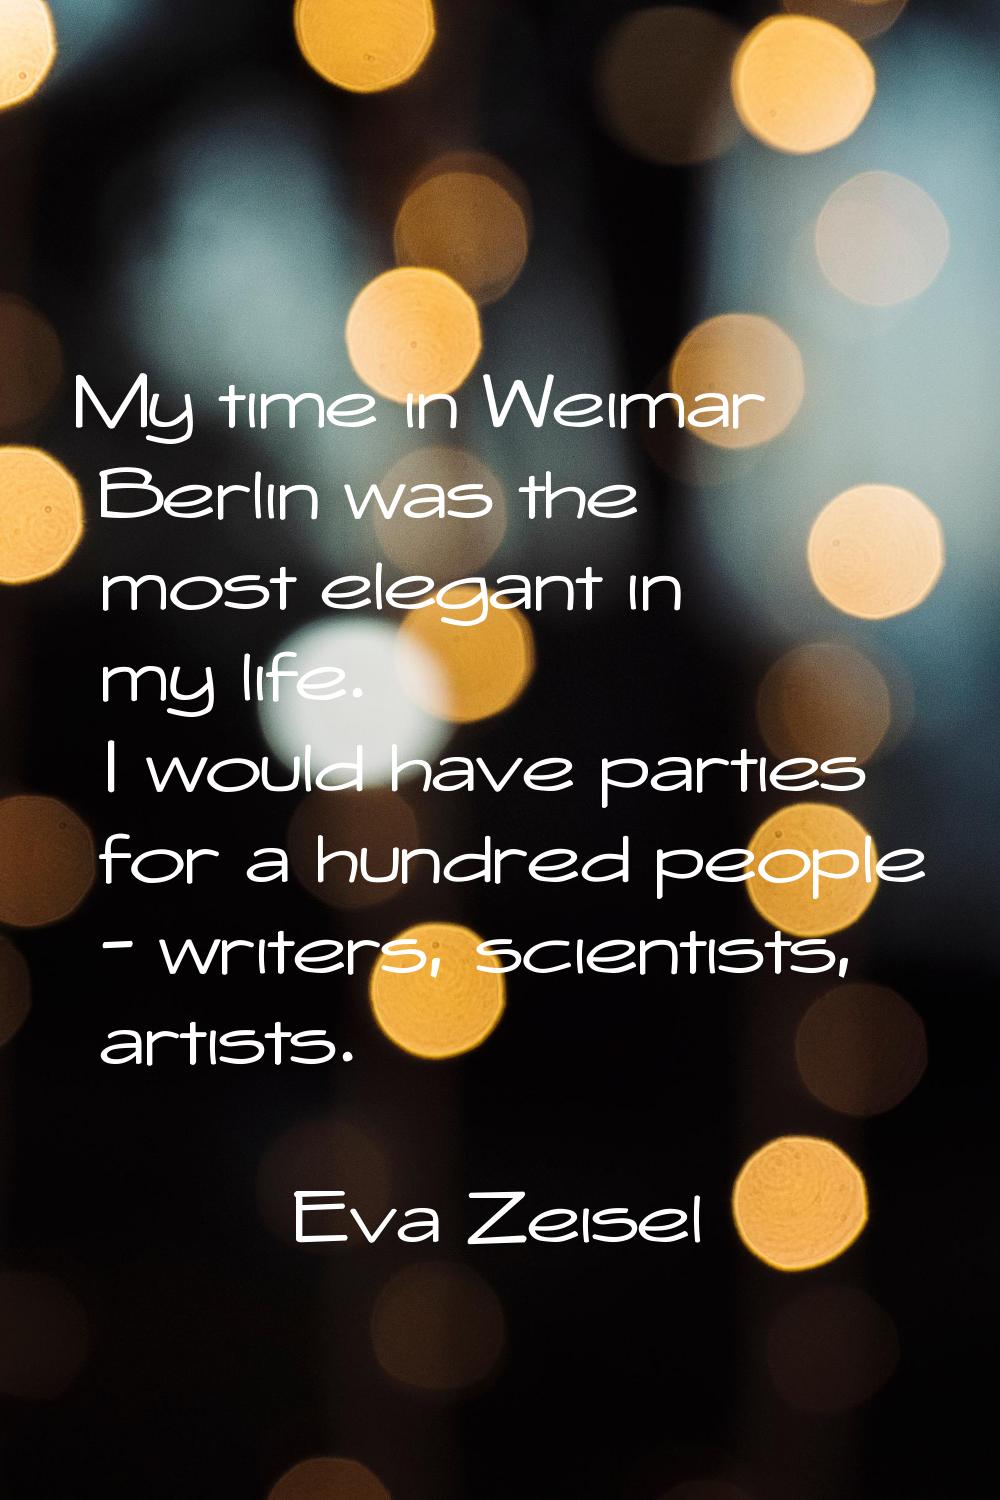 My time in Weimar Berlin was the most elegant in my life. I would have parties for a hundred people